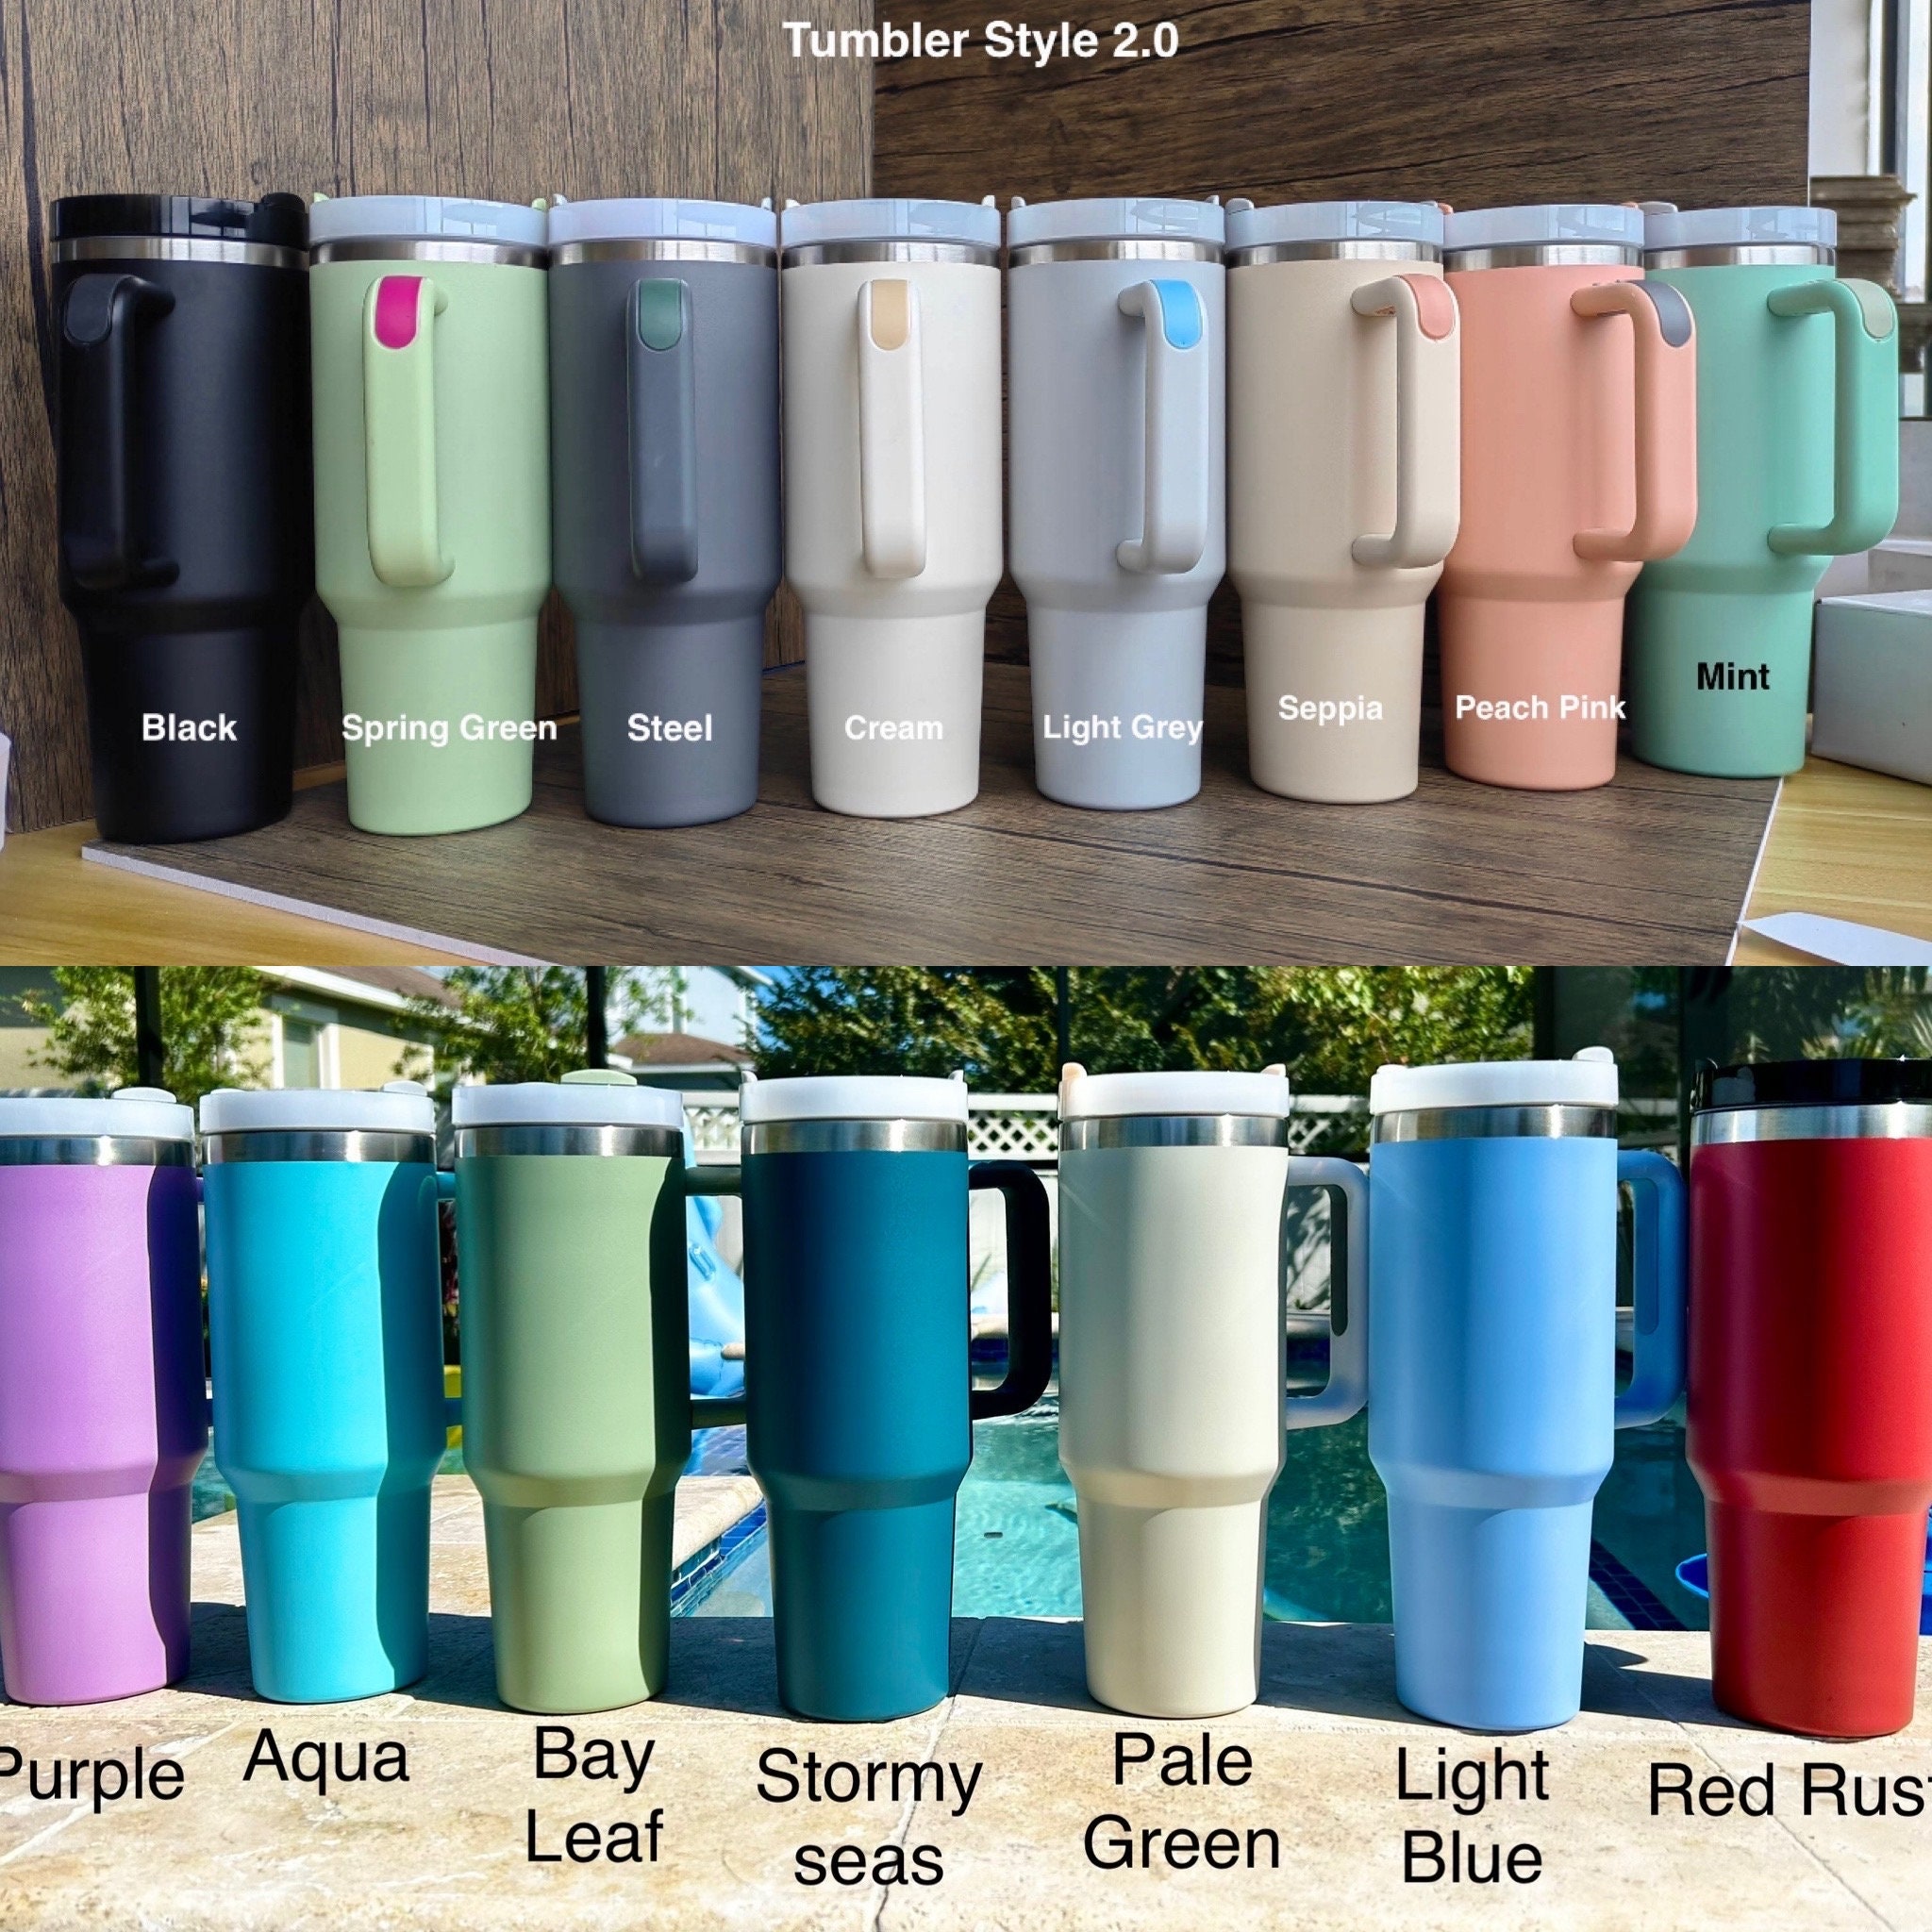 CLOSED PRE-ORDER : 2.0 Newer version of the 40 oz Stanly dupe tumblers 